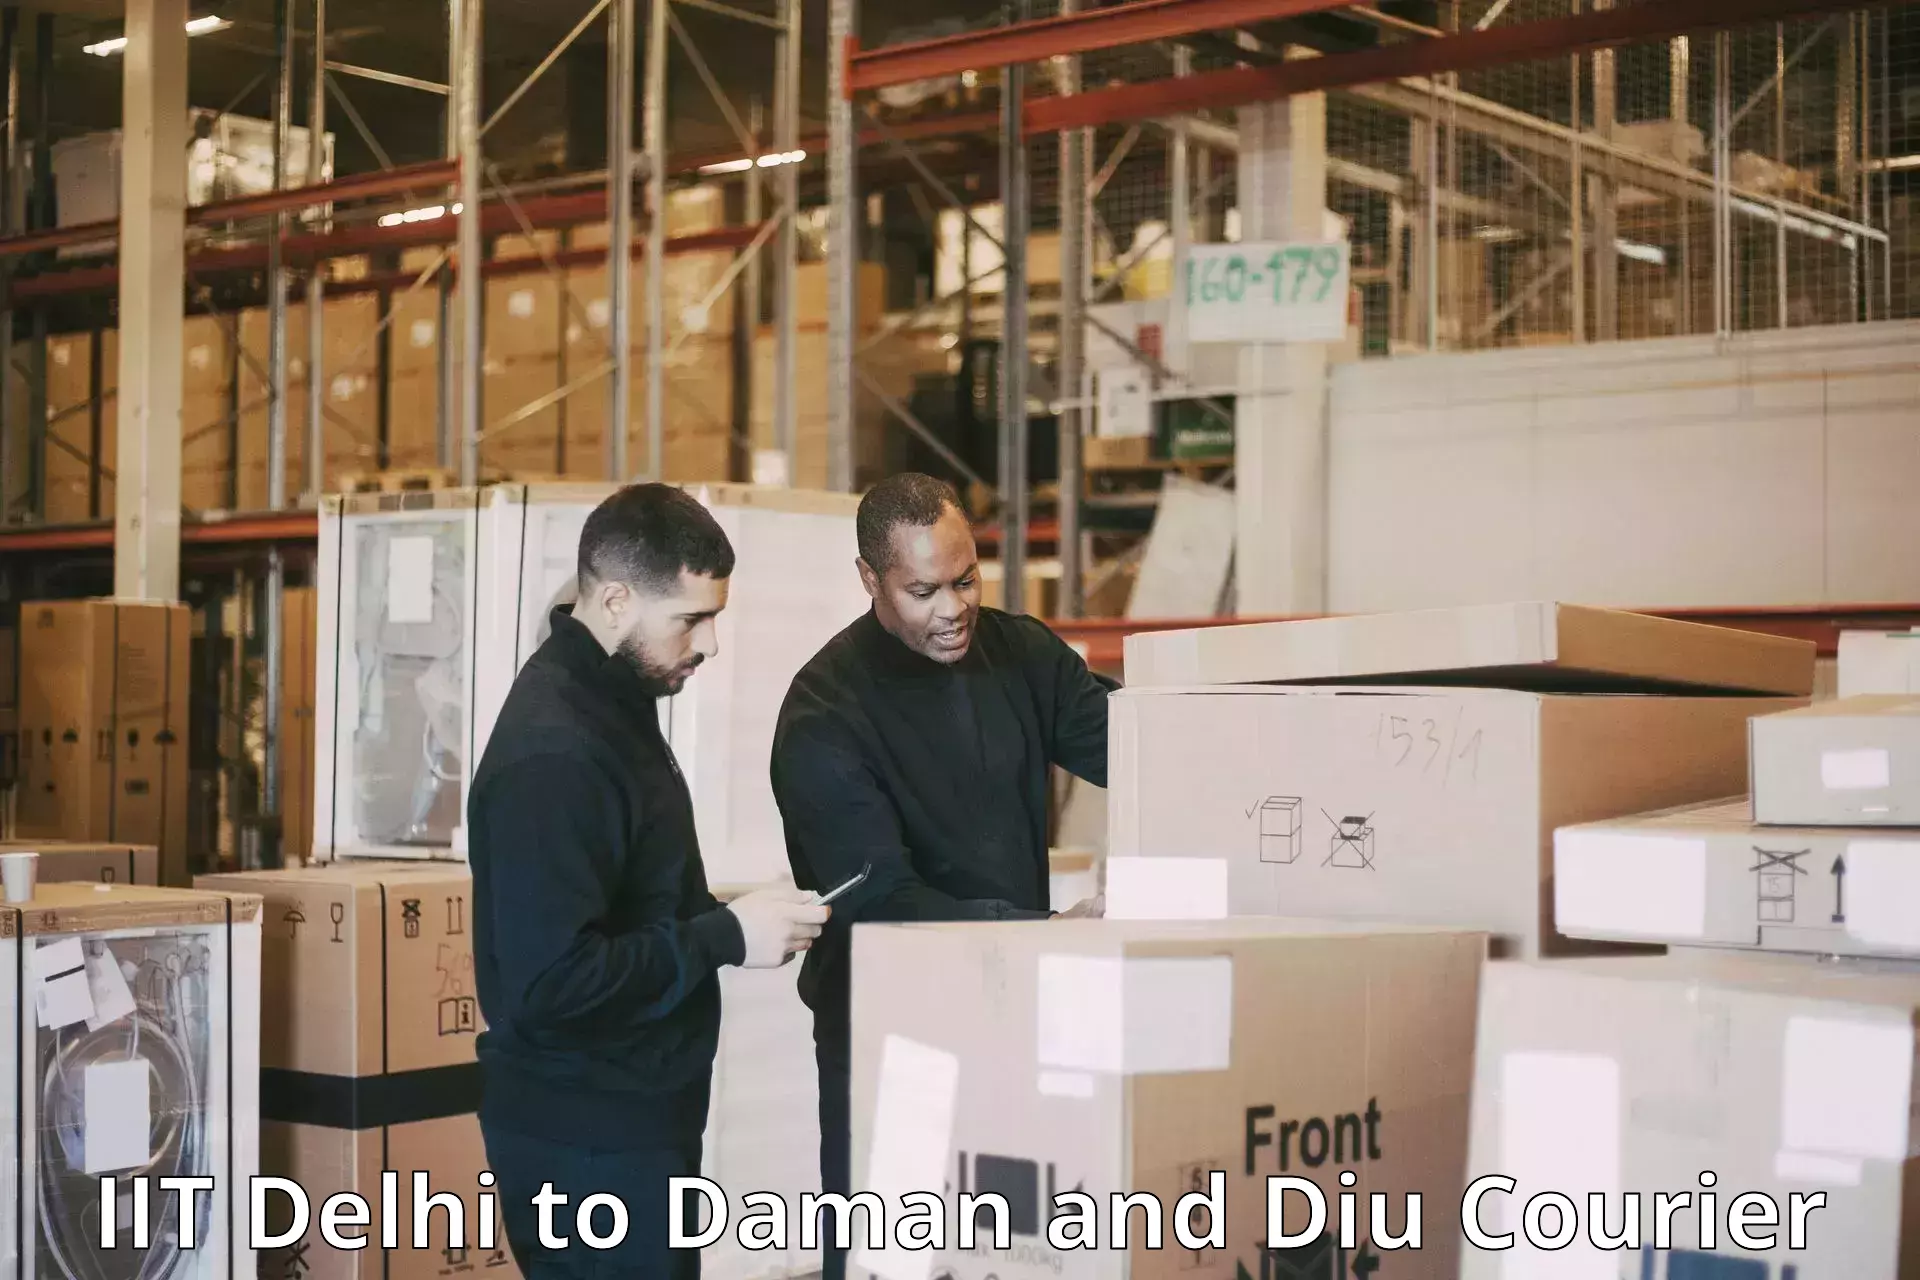 Courier service partnerships IIT Delhi to Daman and Diu